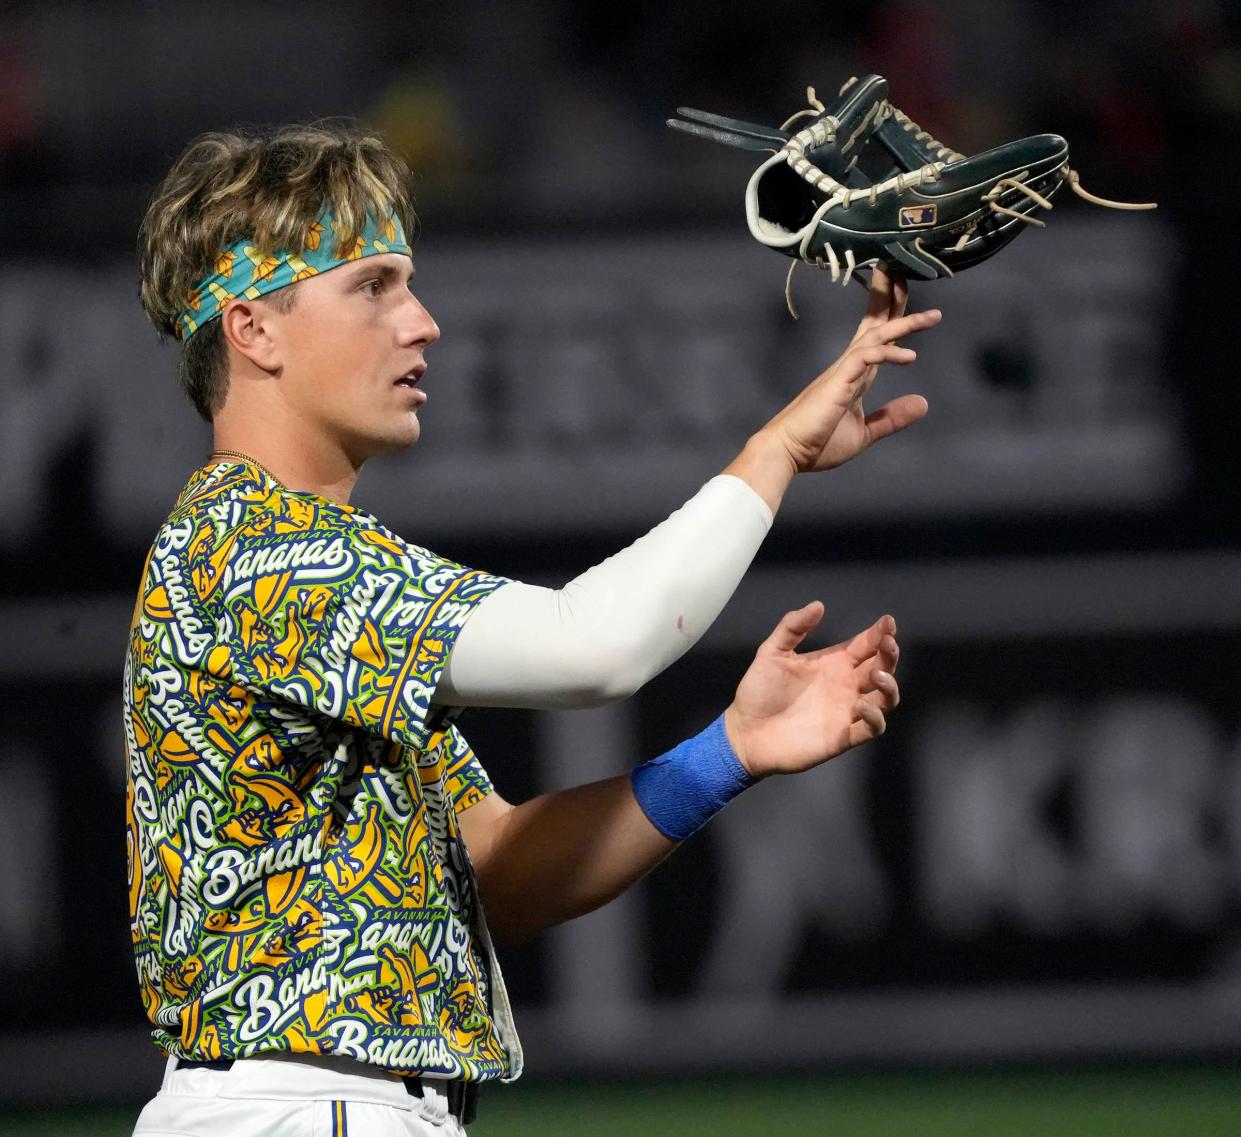 The Savannah Bananas Jackson Olson (8) balances his glove on his hand during the exhibition baseball game against the Party Animals at Franklin Field in Franklin on Friday, Sept. 8, 2023.